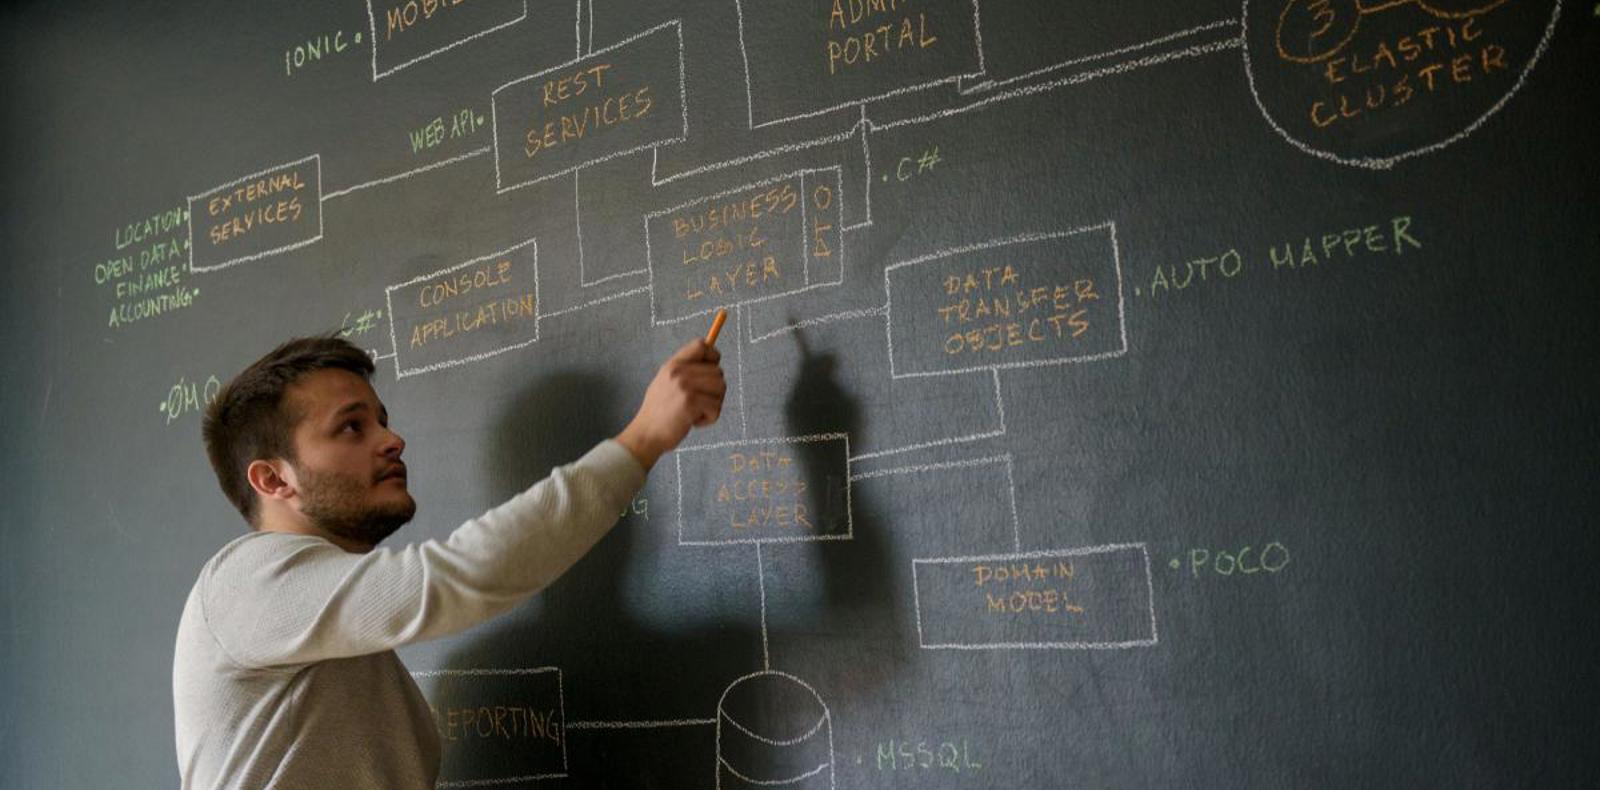 A man pointing at a black board with diagrams on it. Explaining something interesting.